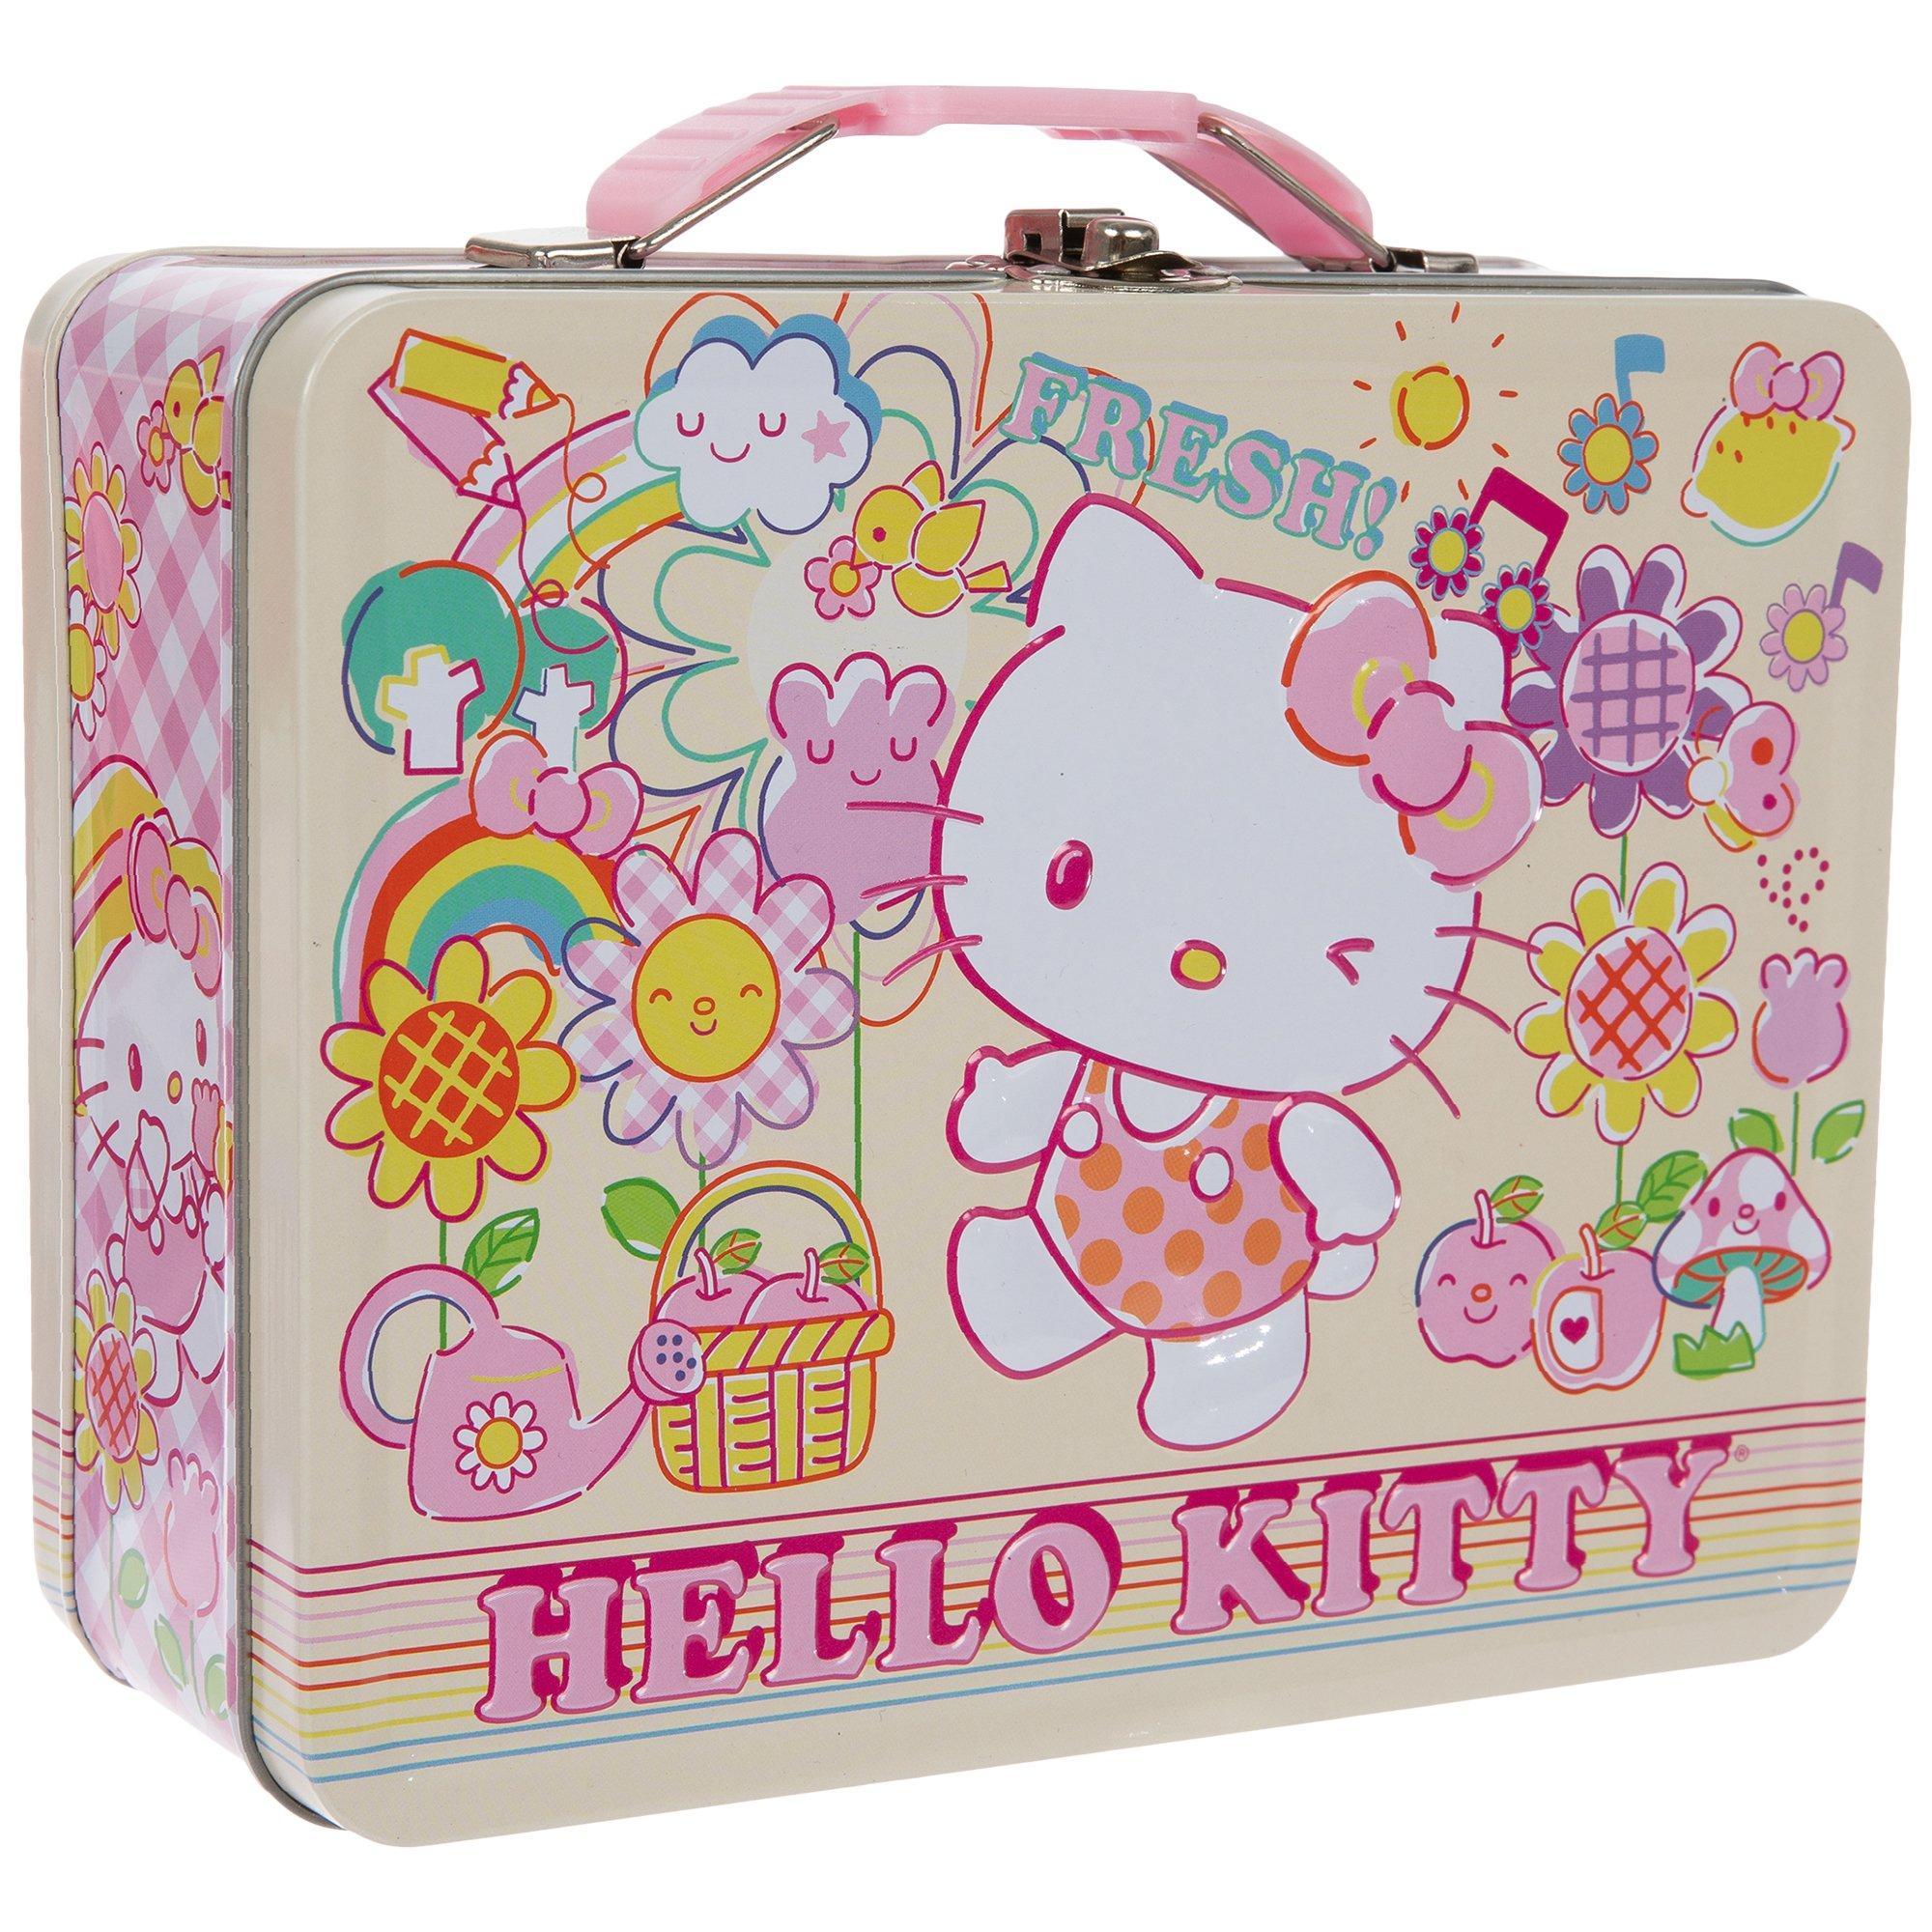 THE TIN BOX COMPANY HELLO KITTY XL TIN LUNCHBOX WITH WINDOW - NEW MINT  CONDITION